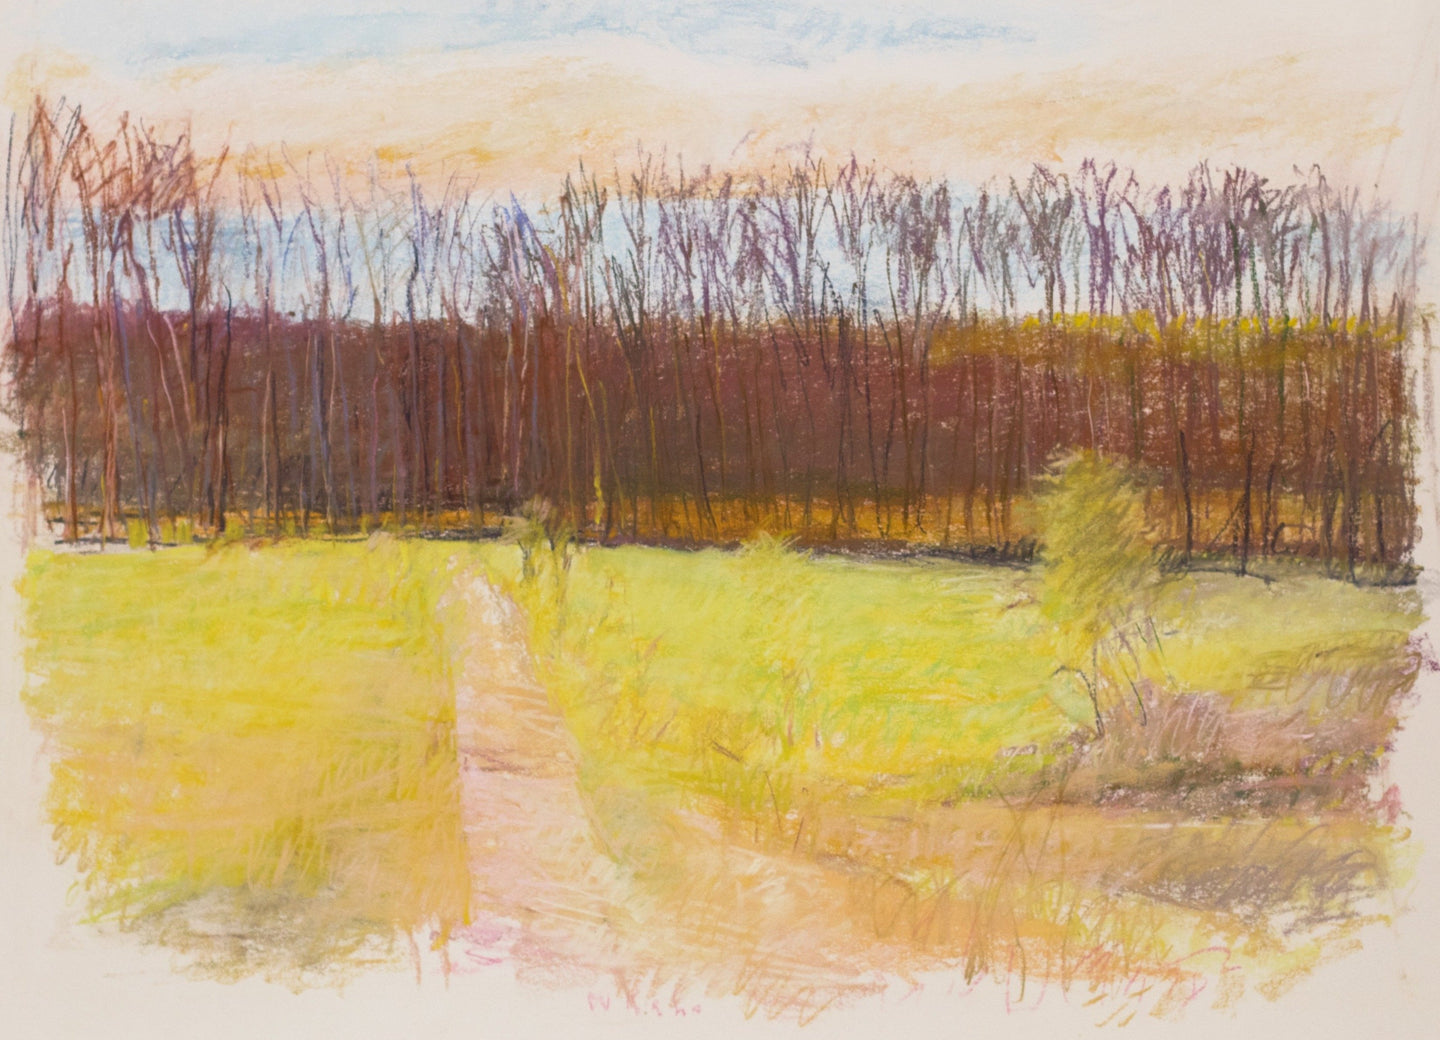 Wolf Kahn (1927-2020) Uphill Path - Apple Pie Ridge (VA), 1989  Pastel on paper  30 x 40 inches  Wolf Kahn is known for his fusion of color, spontaneity and loose brush strokes, which create the luminous and vibrant atmospheric landscapes and color fields. Kahn’s unique blend of American Realism and the formal discipline of Color Field painting sets the work of Wolf Kahn apart from his contemporaries. Available at Manolis Projects Gallery